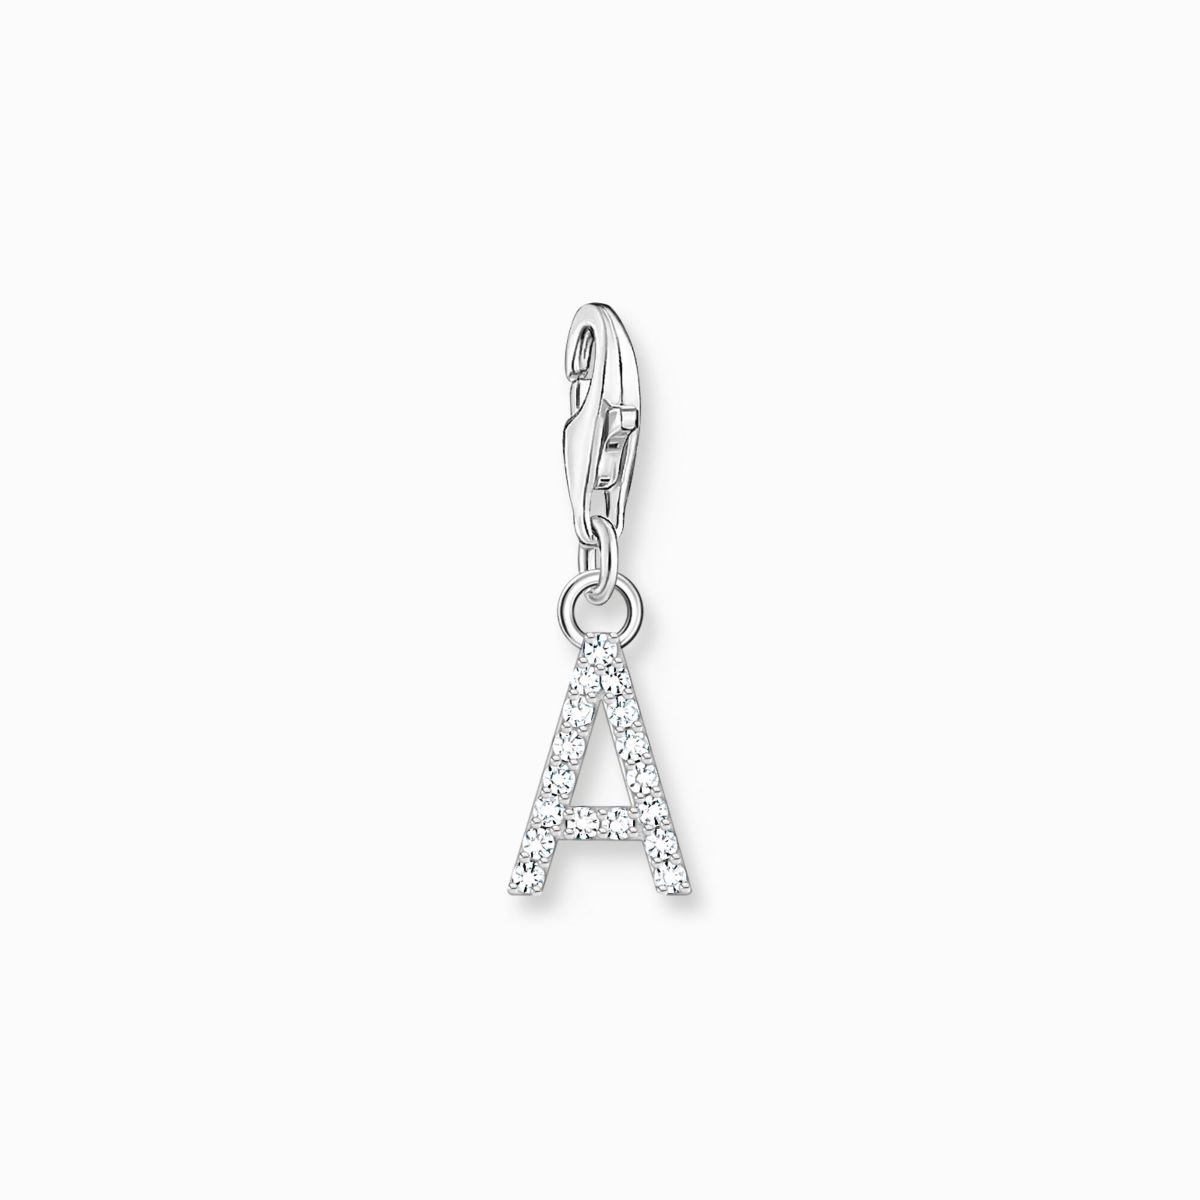 Thomas Sabo Letter A Charm with CZ - 1938-051-14